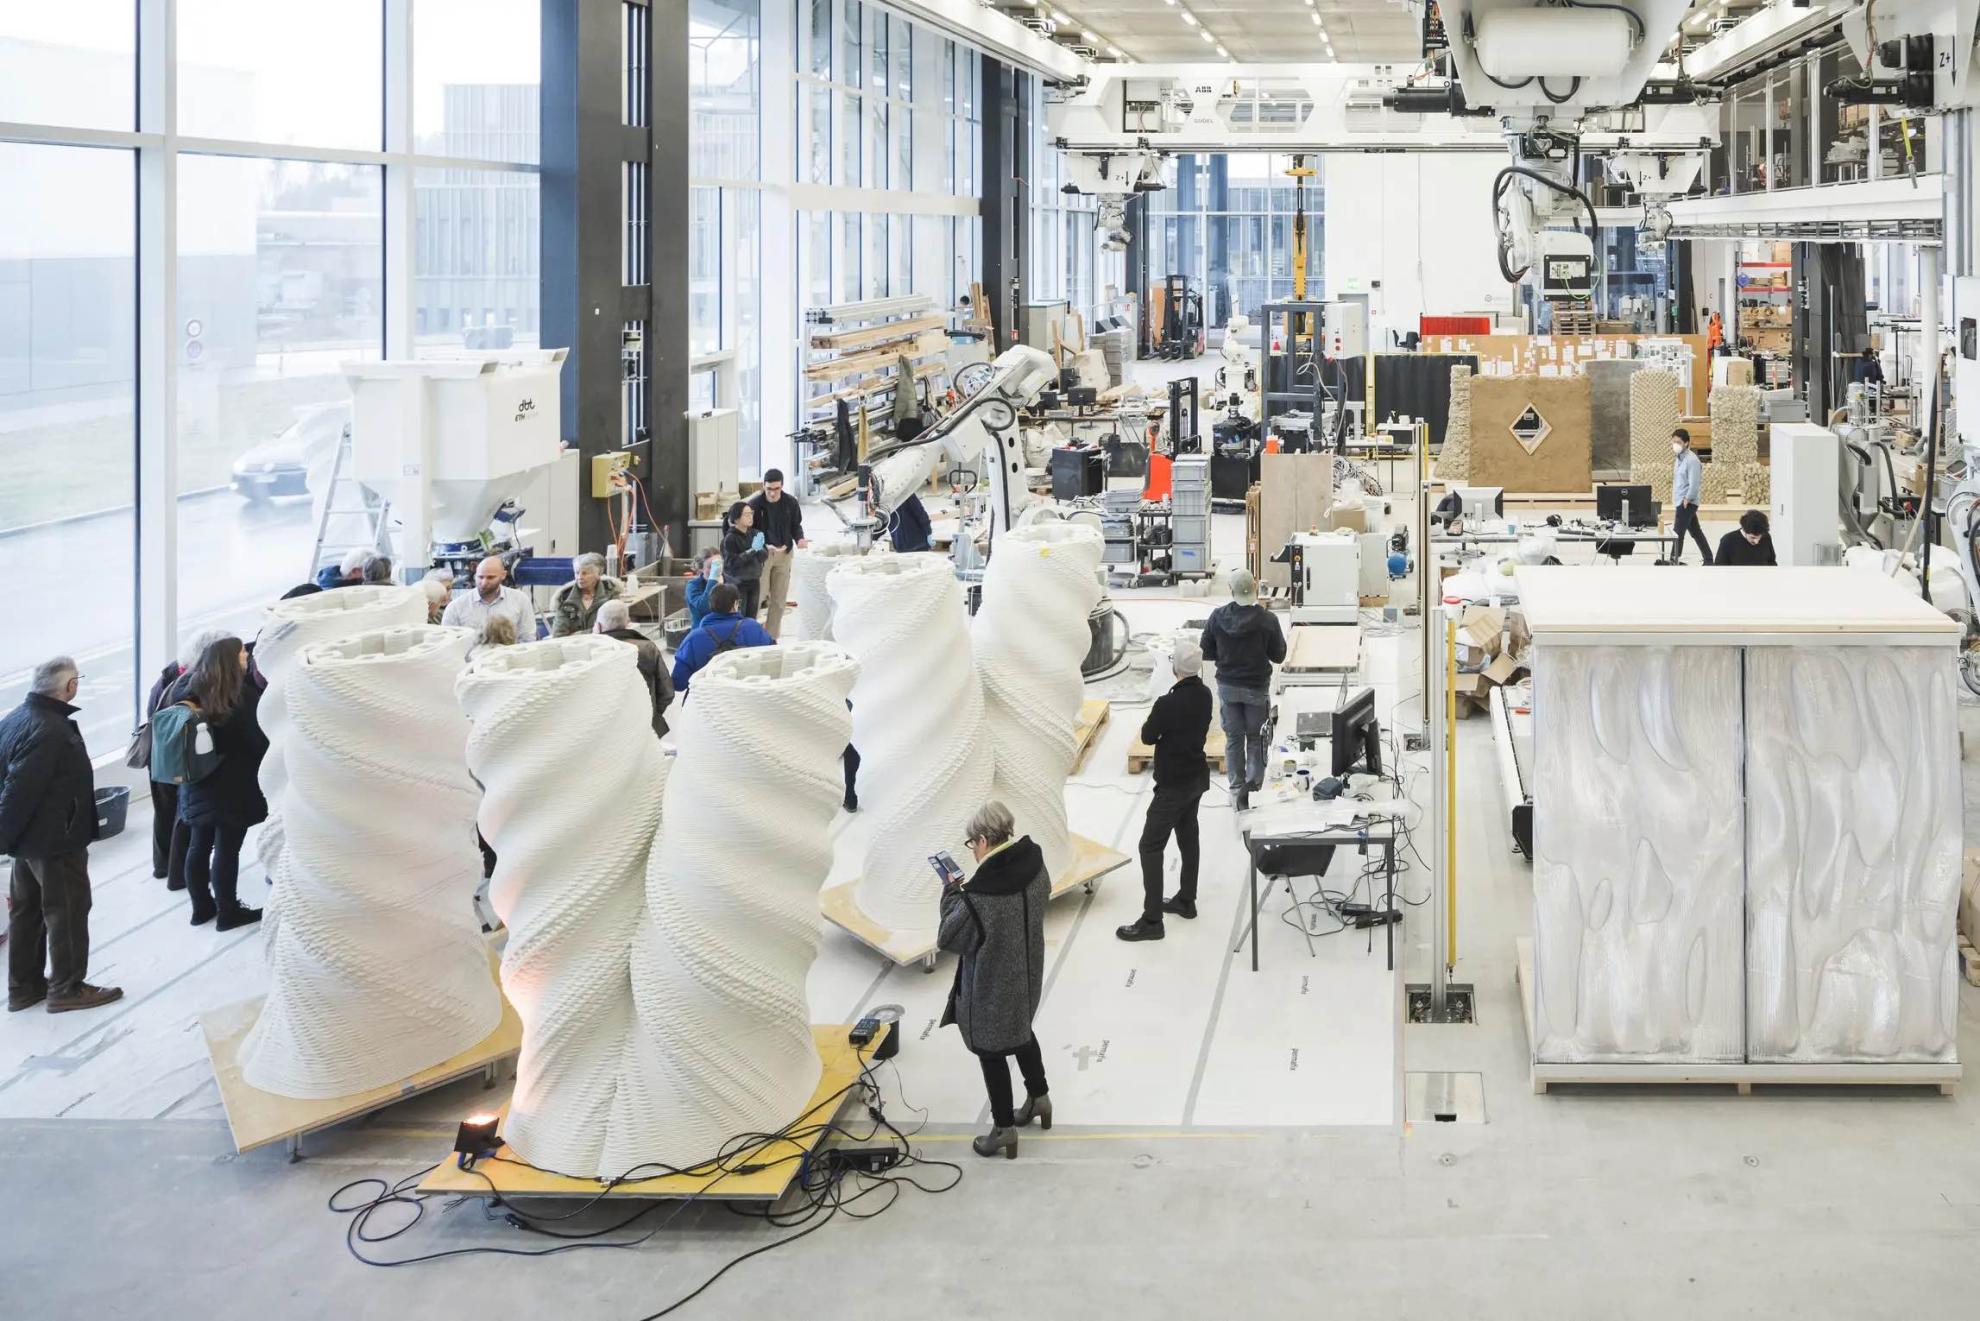 The branched columns are currently being printed in a workshop at the Department of Architecture at ETH Zurich. Source: Benjamin Hofer / Nova Fundaziun Origen